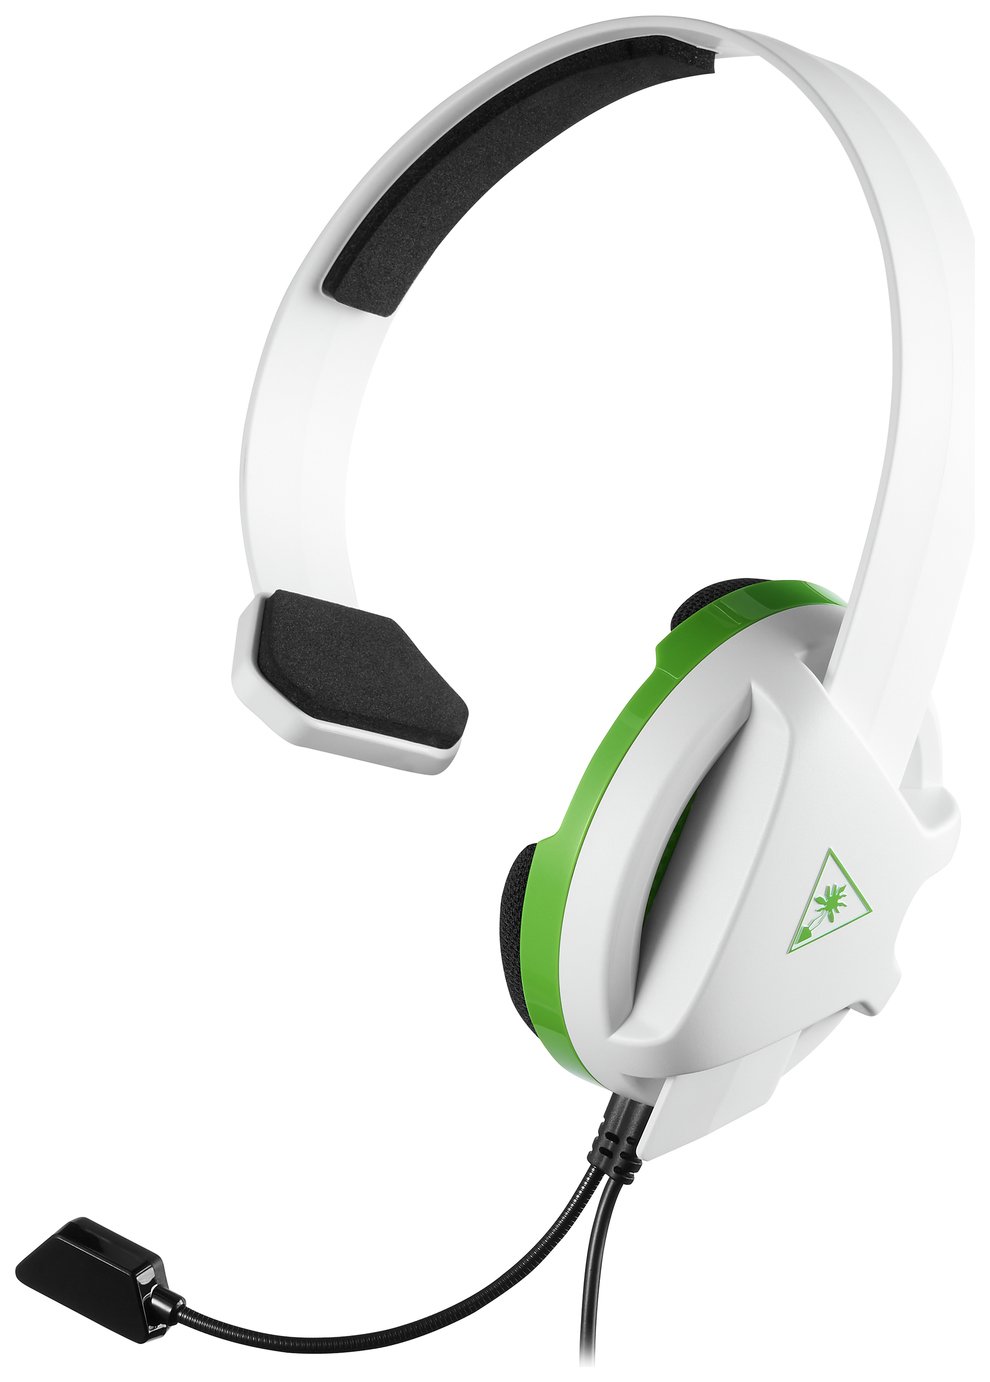 can i use ps4 turtle beach headset on pc